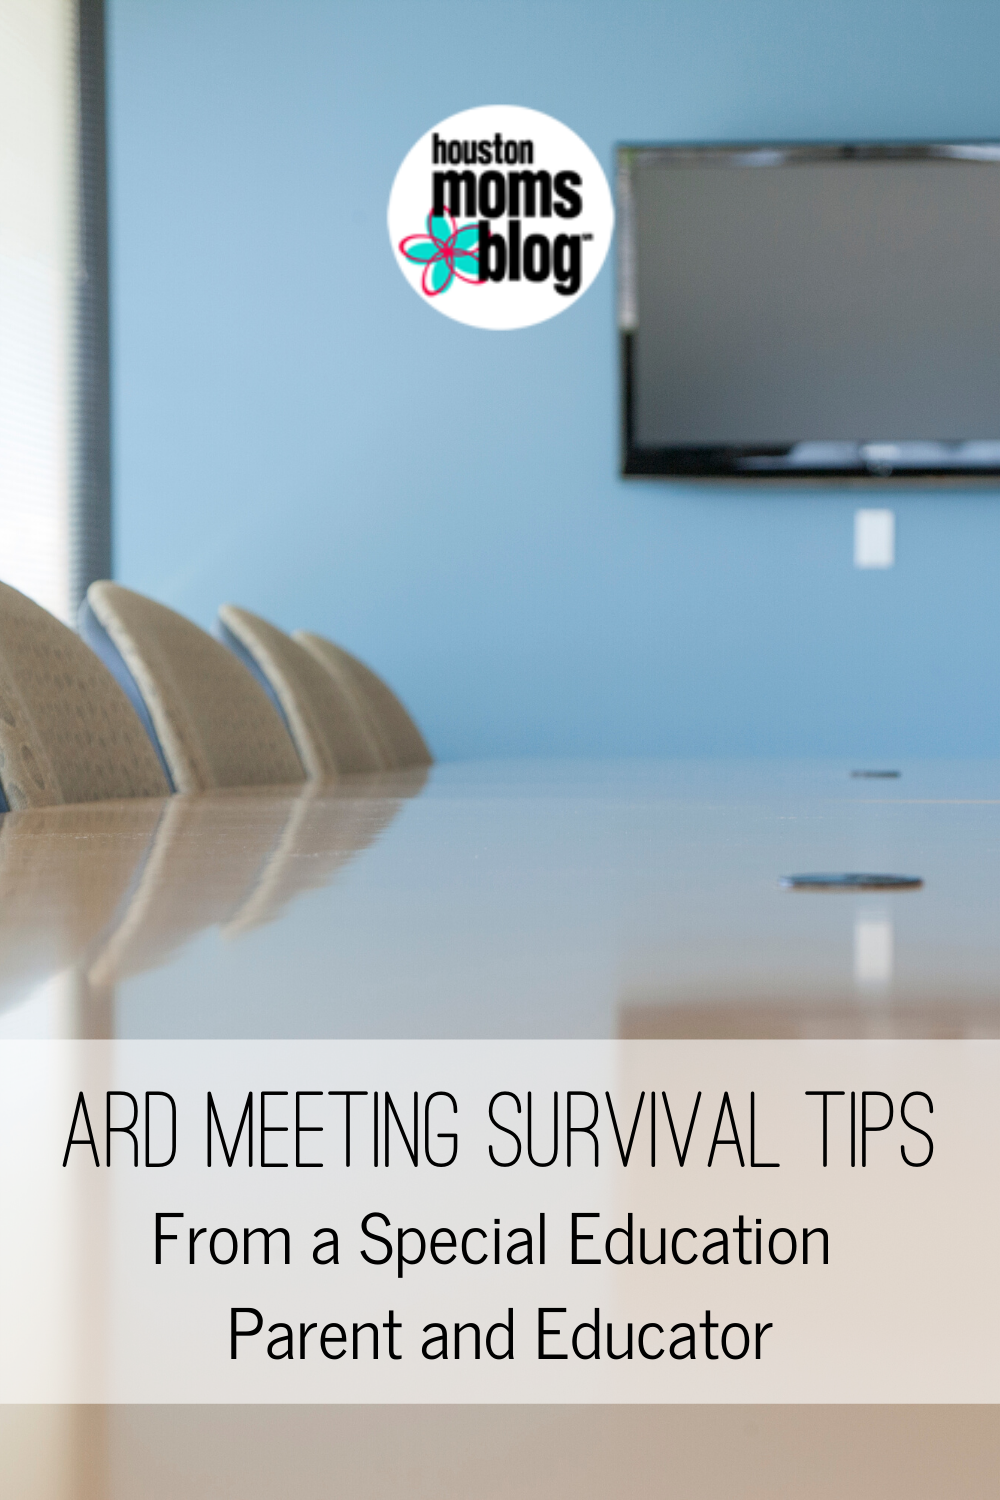 Houston Moms Blog "ARD Meeting Survival Tips:: From a Special Education Parent and Educator" #houstonmomsblog #momsaroundhouston